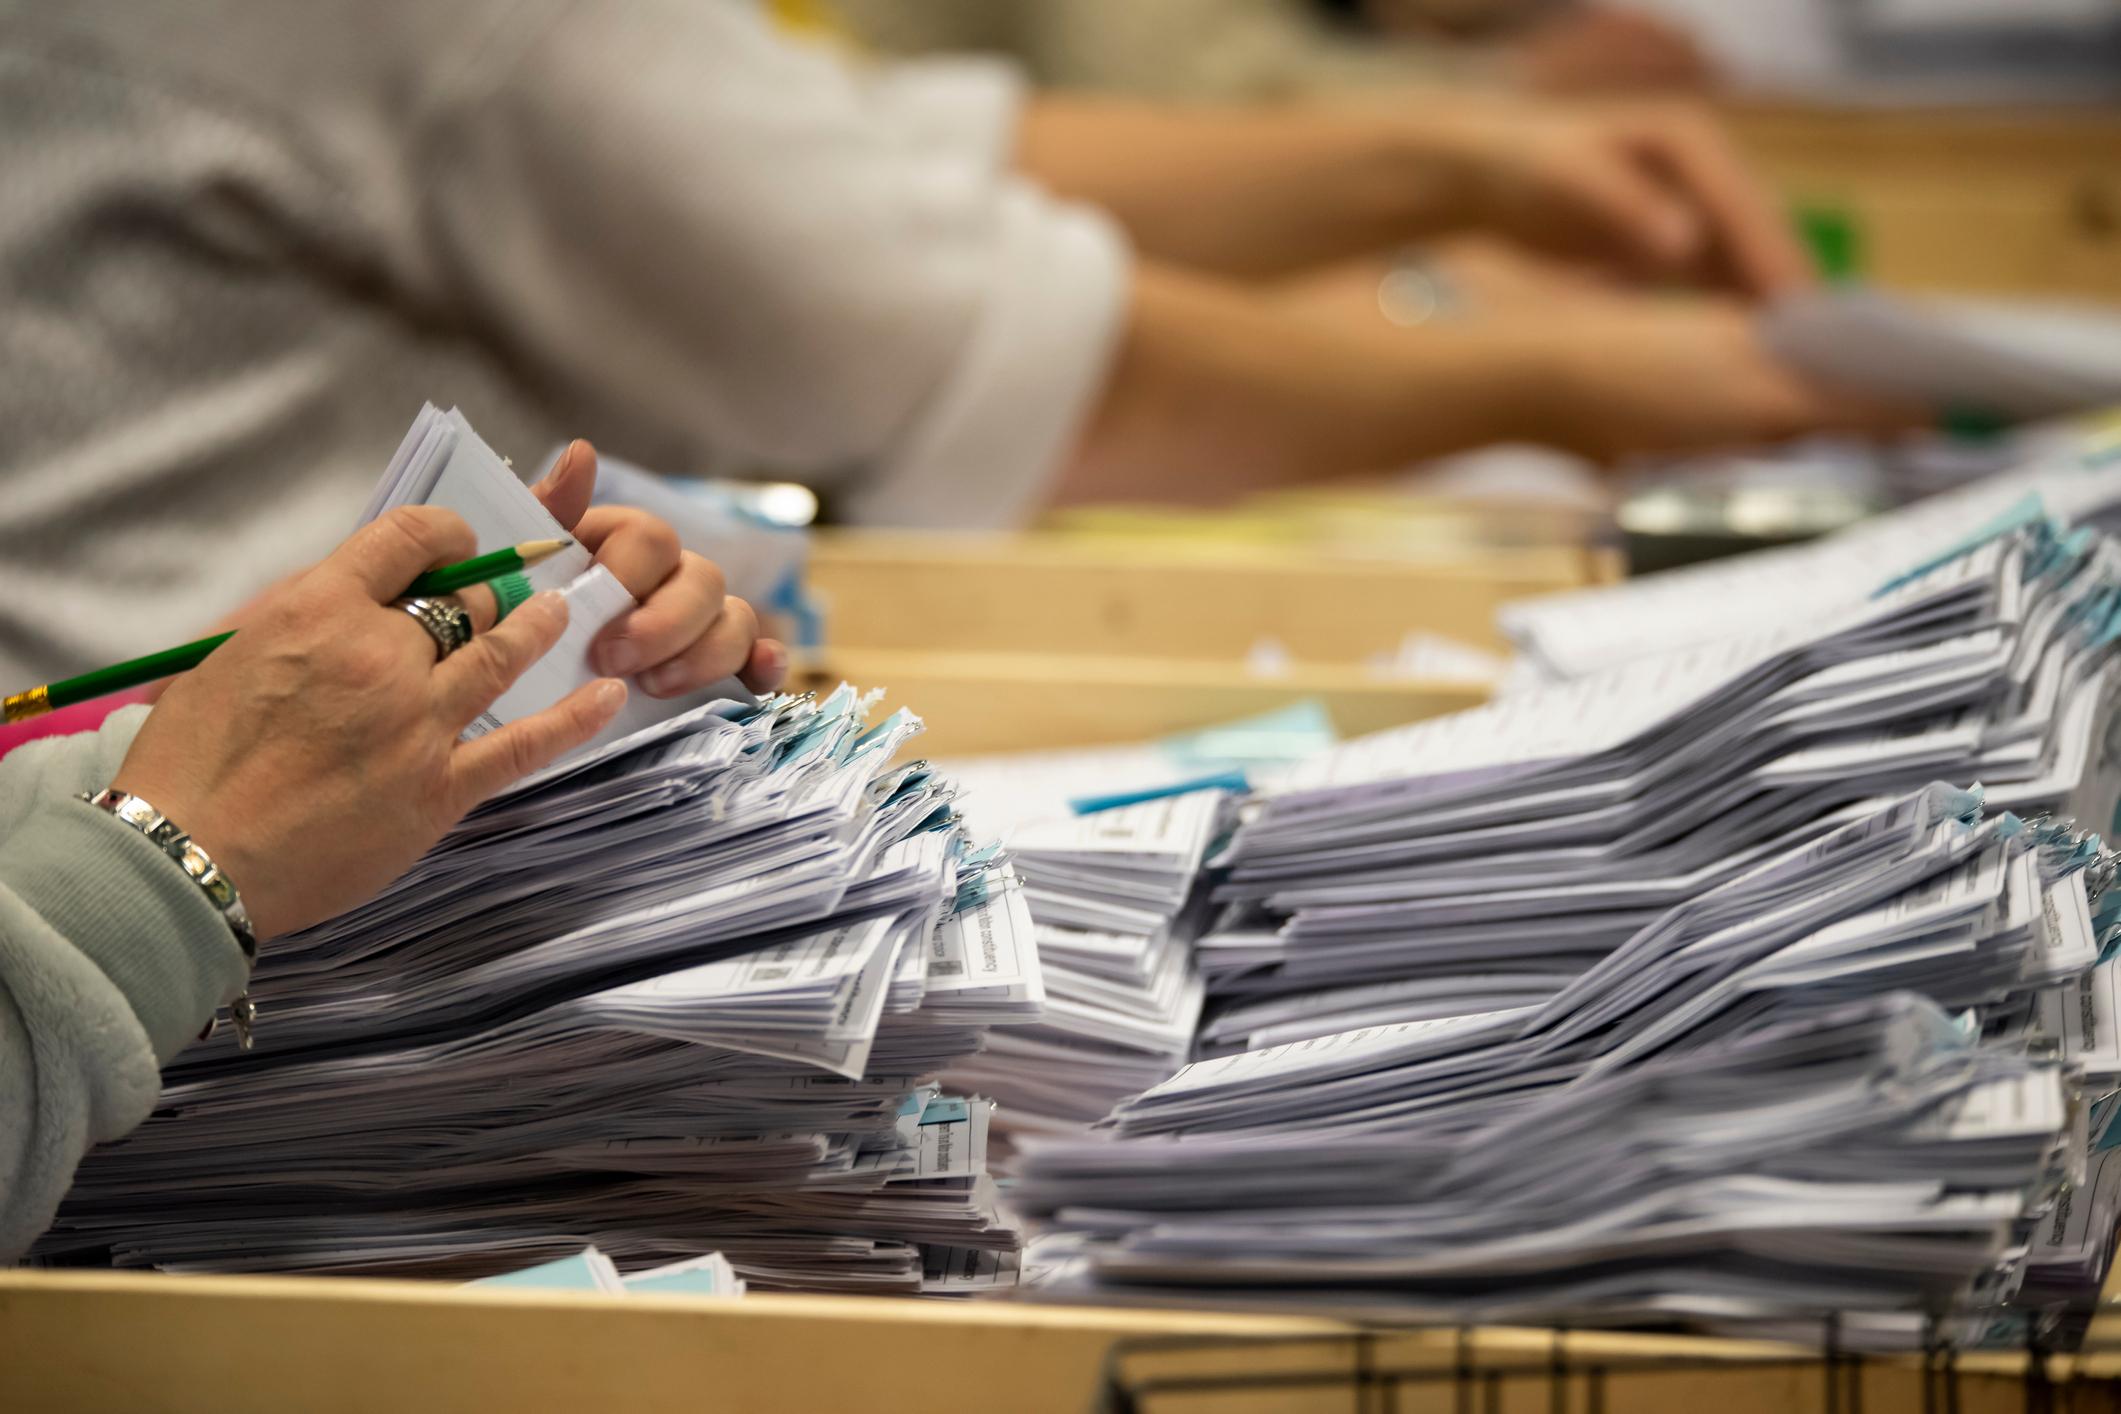 Ballot papers being counted during an election.